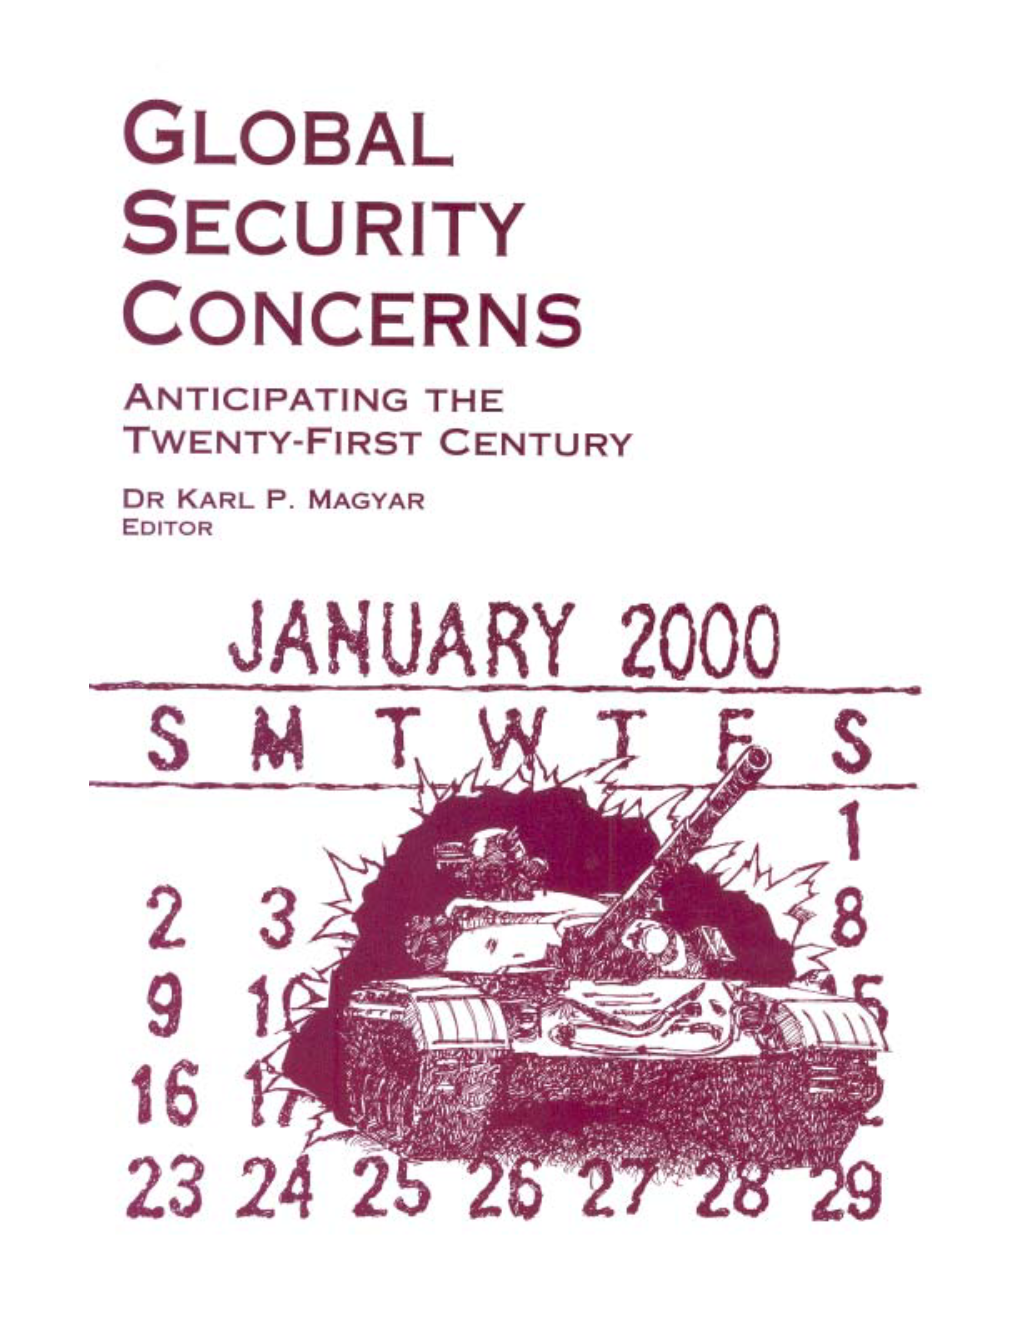 Global Security Concerns: Anticipating the Twenty-First Century / Karl P